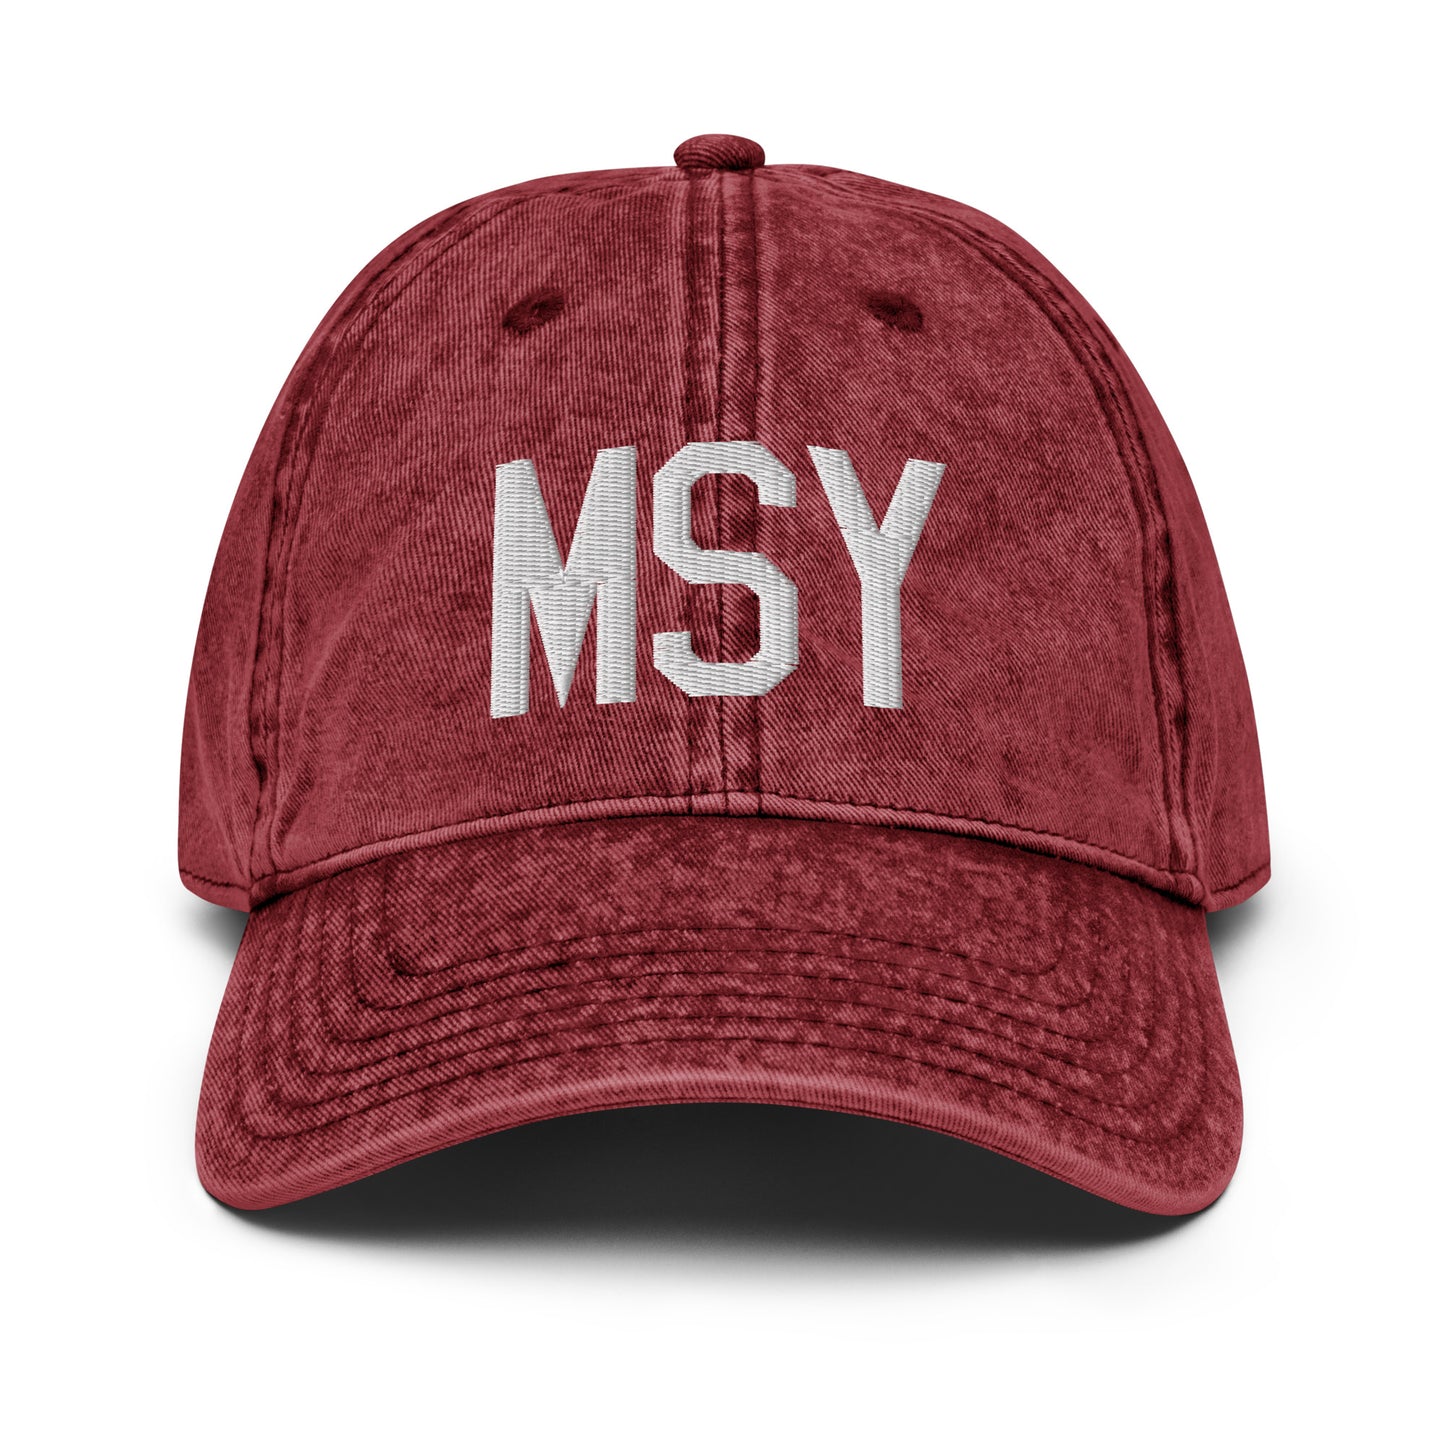 Airport Code Twill Cap - White • MSY New Orleans • YHM Designs - Image 19